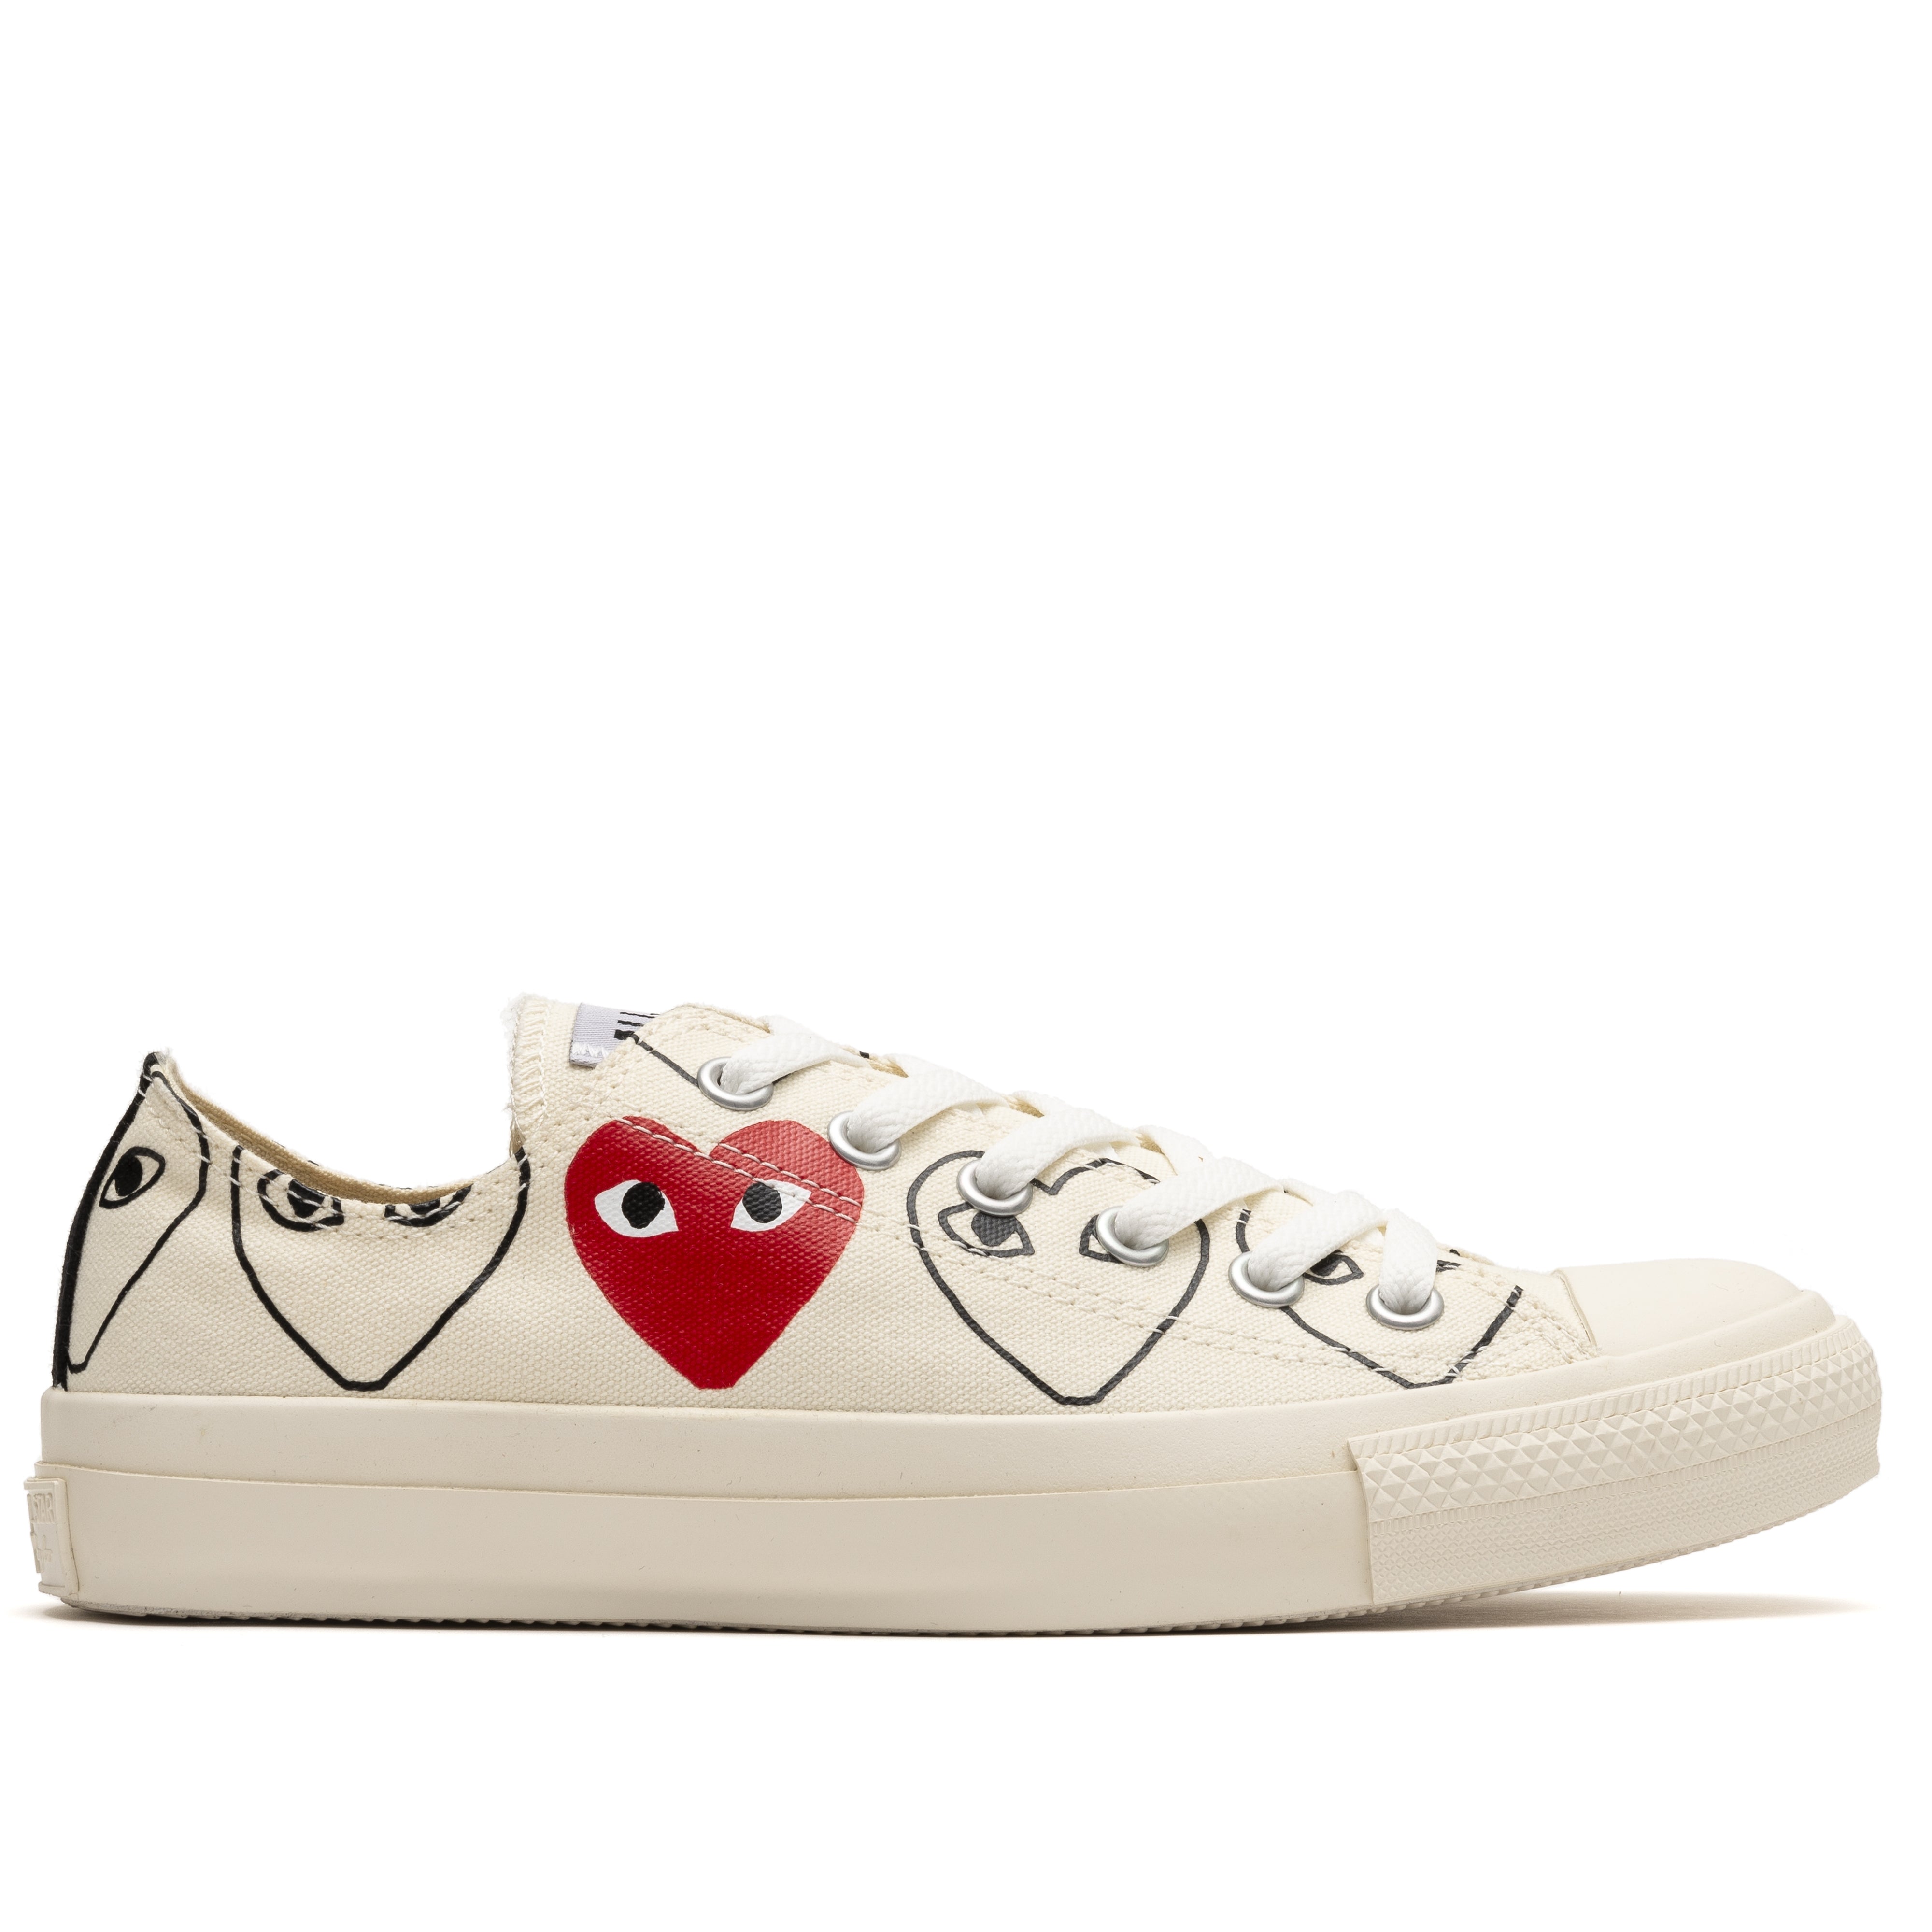 cdg play converse low white